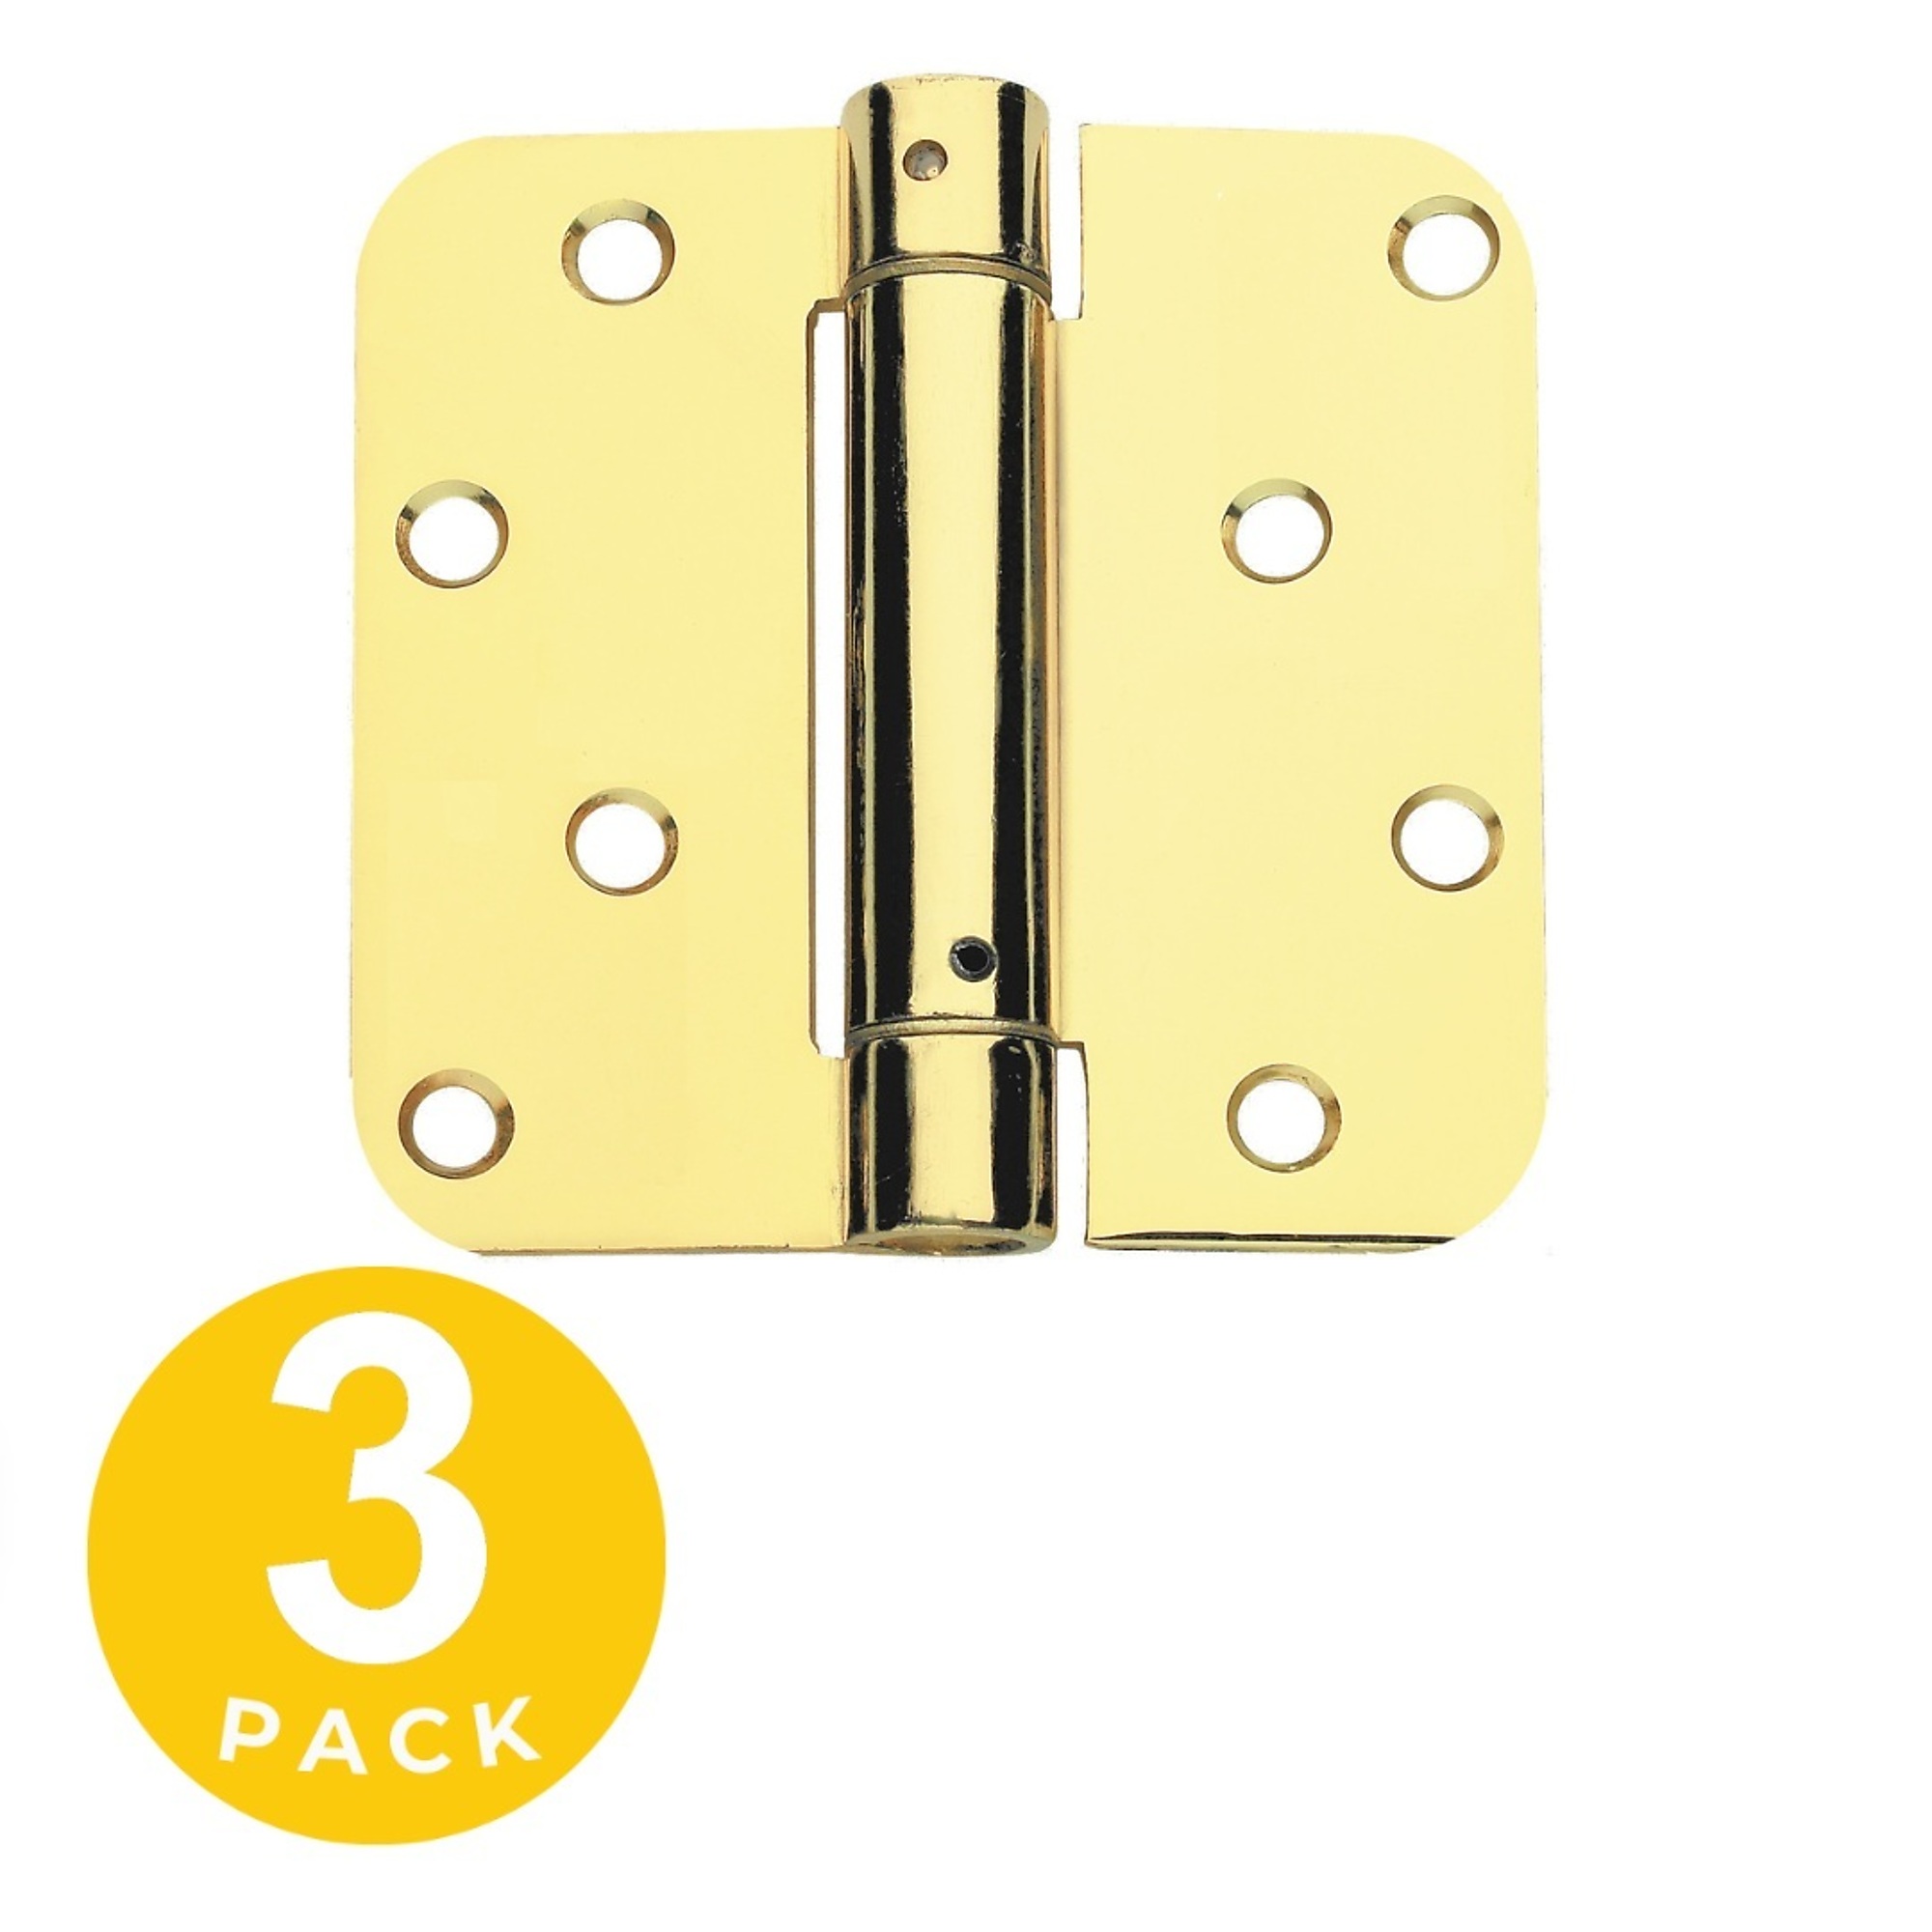 Global Door Controls, Full Mortise Spring Non-Removable Pin Hinge - Set of 3 Model CPS4040-5/8-US3